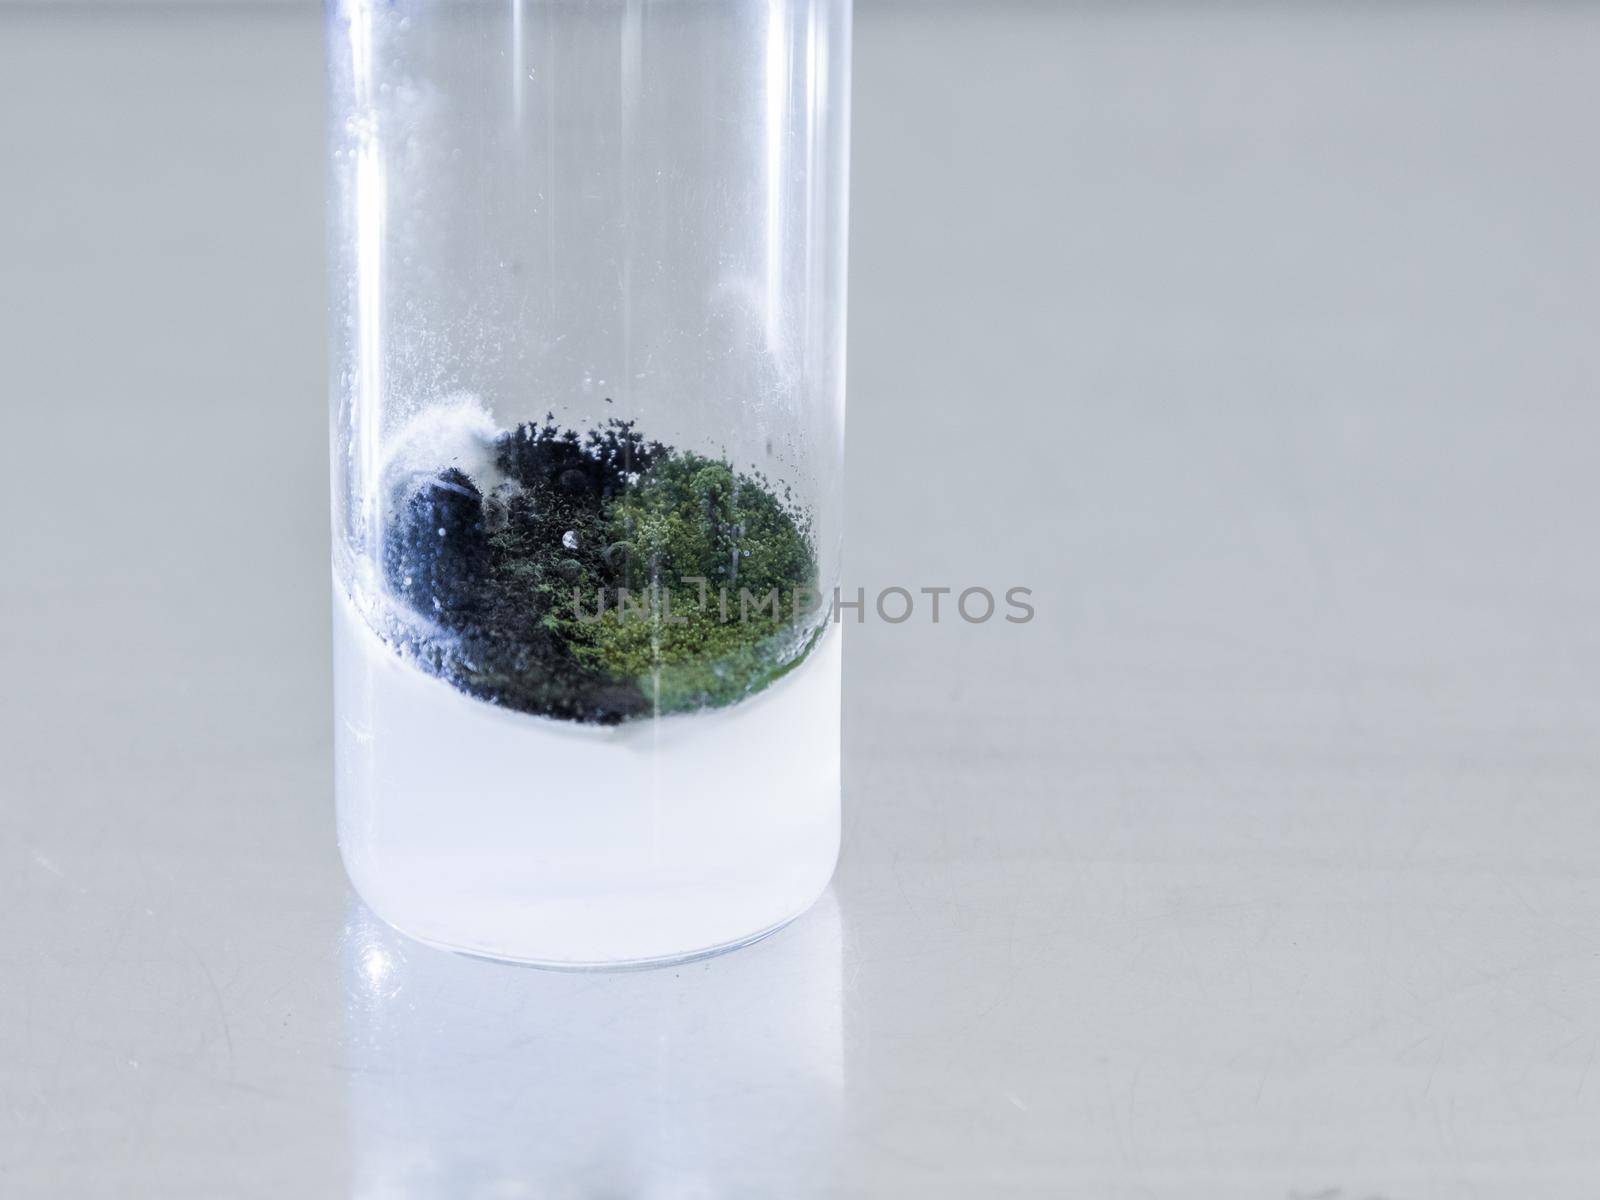 Test tube mold on a metal background. by Jannetta